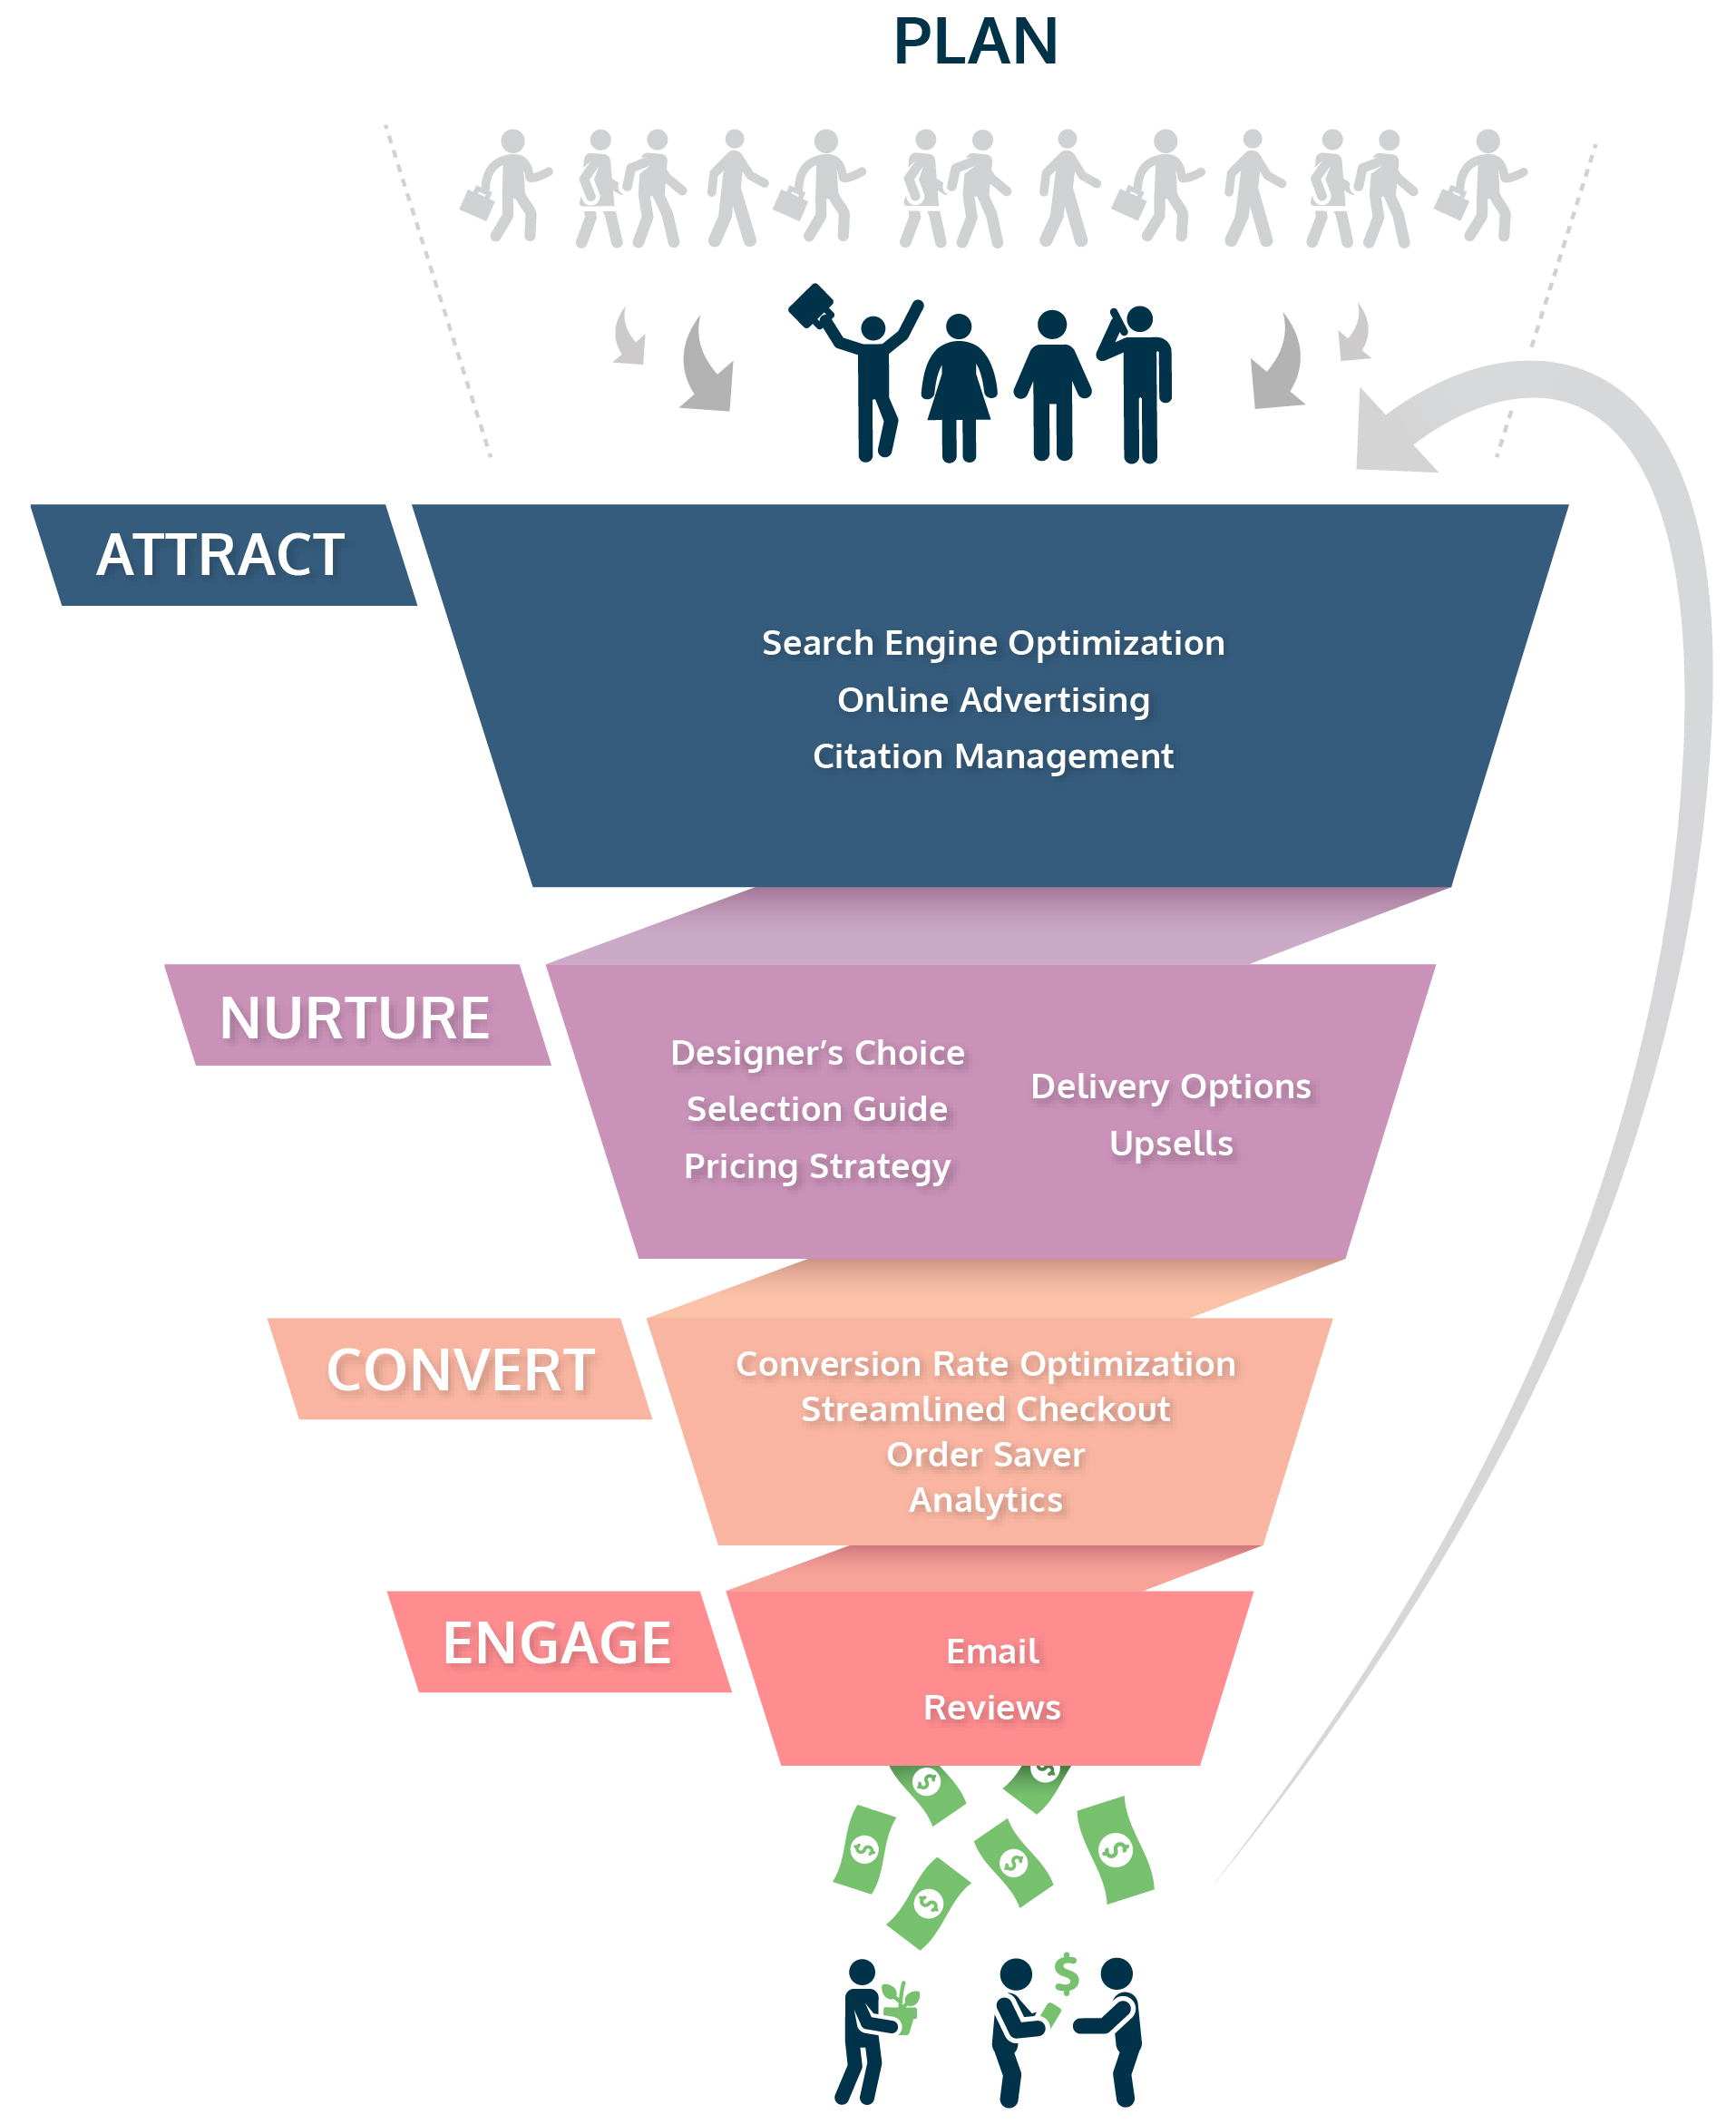 Funnel image representing marketing services and features as one strategic online process to maximize sales.